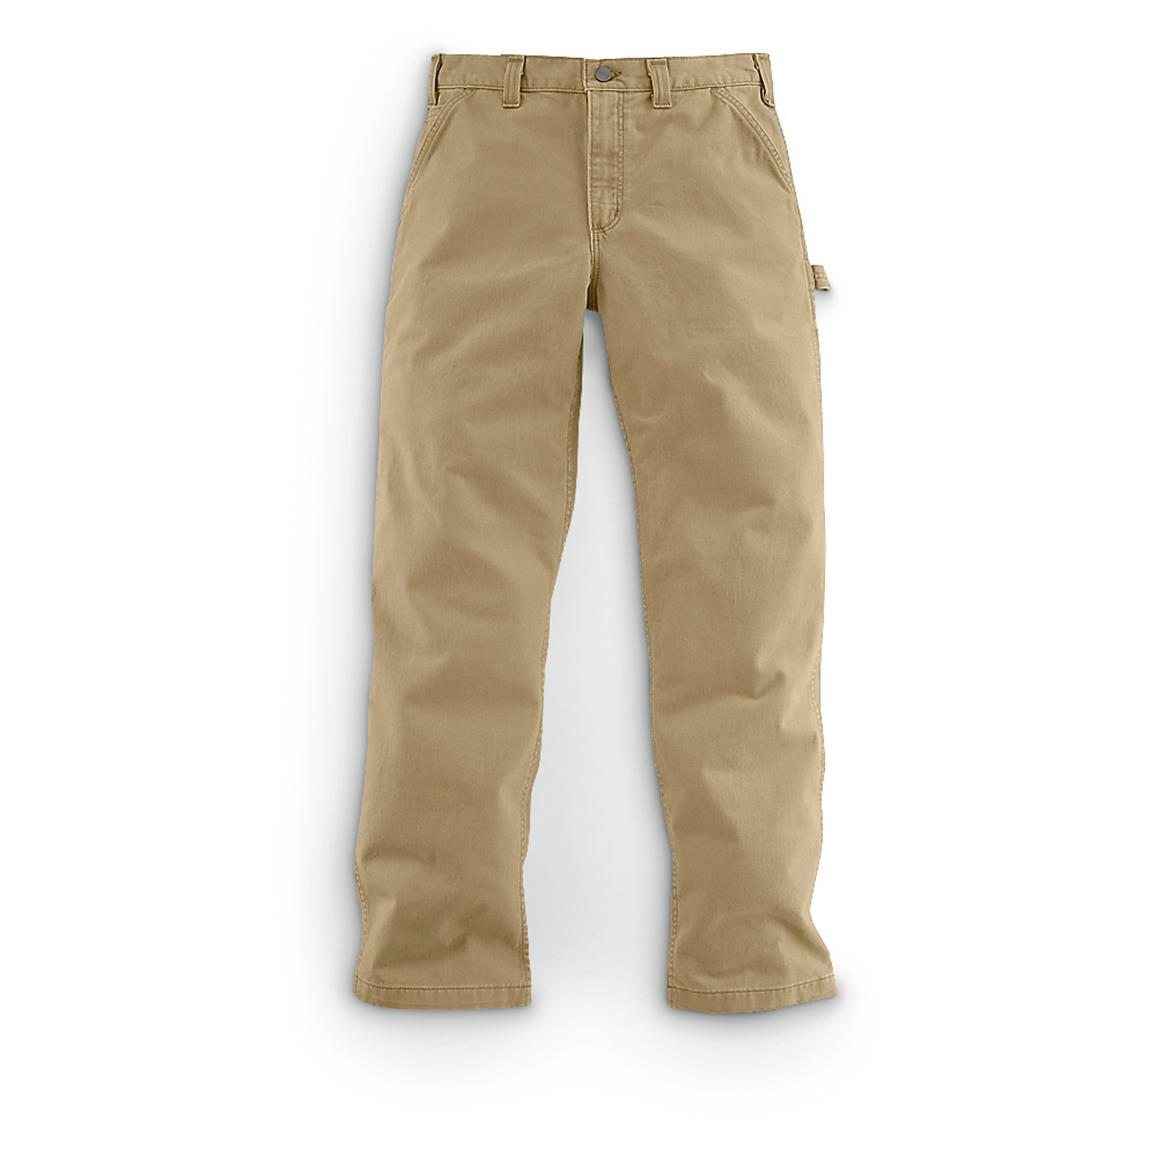 Carhartt Men's Washed Twill Relaxed Fit Work Pants, Dark Khaki